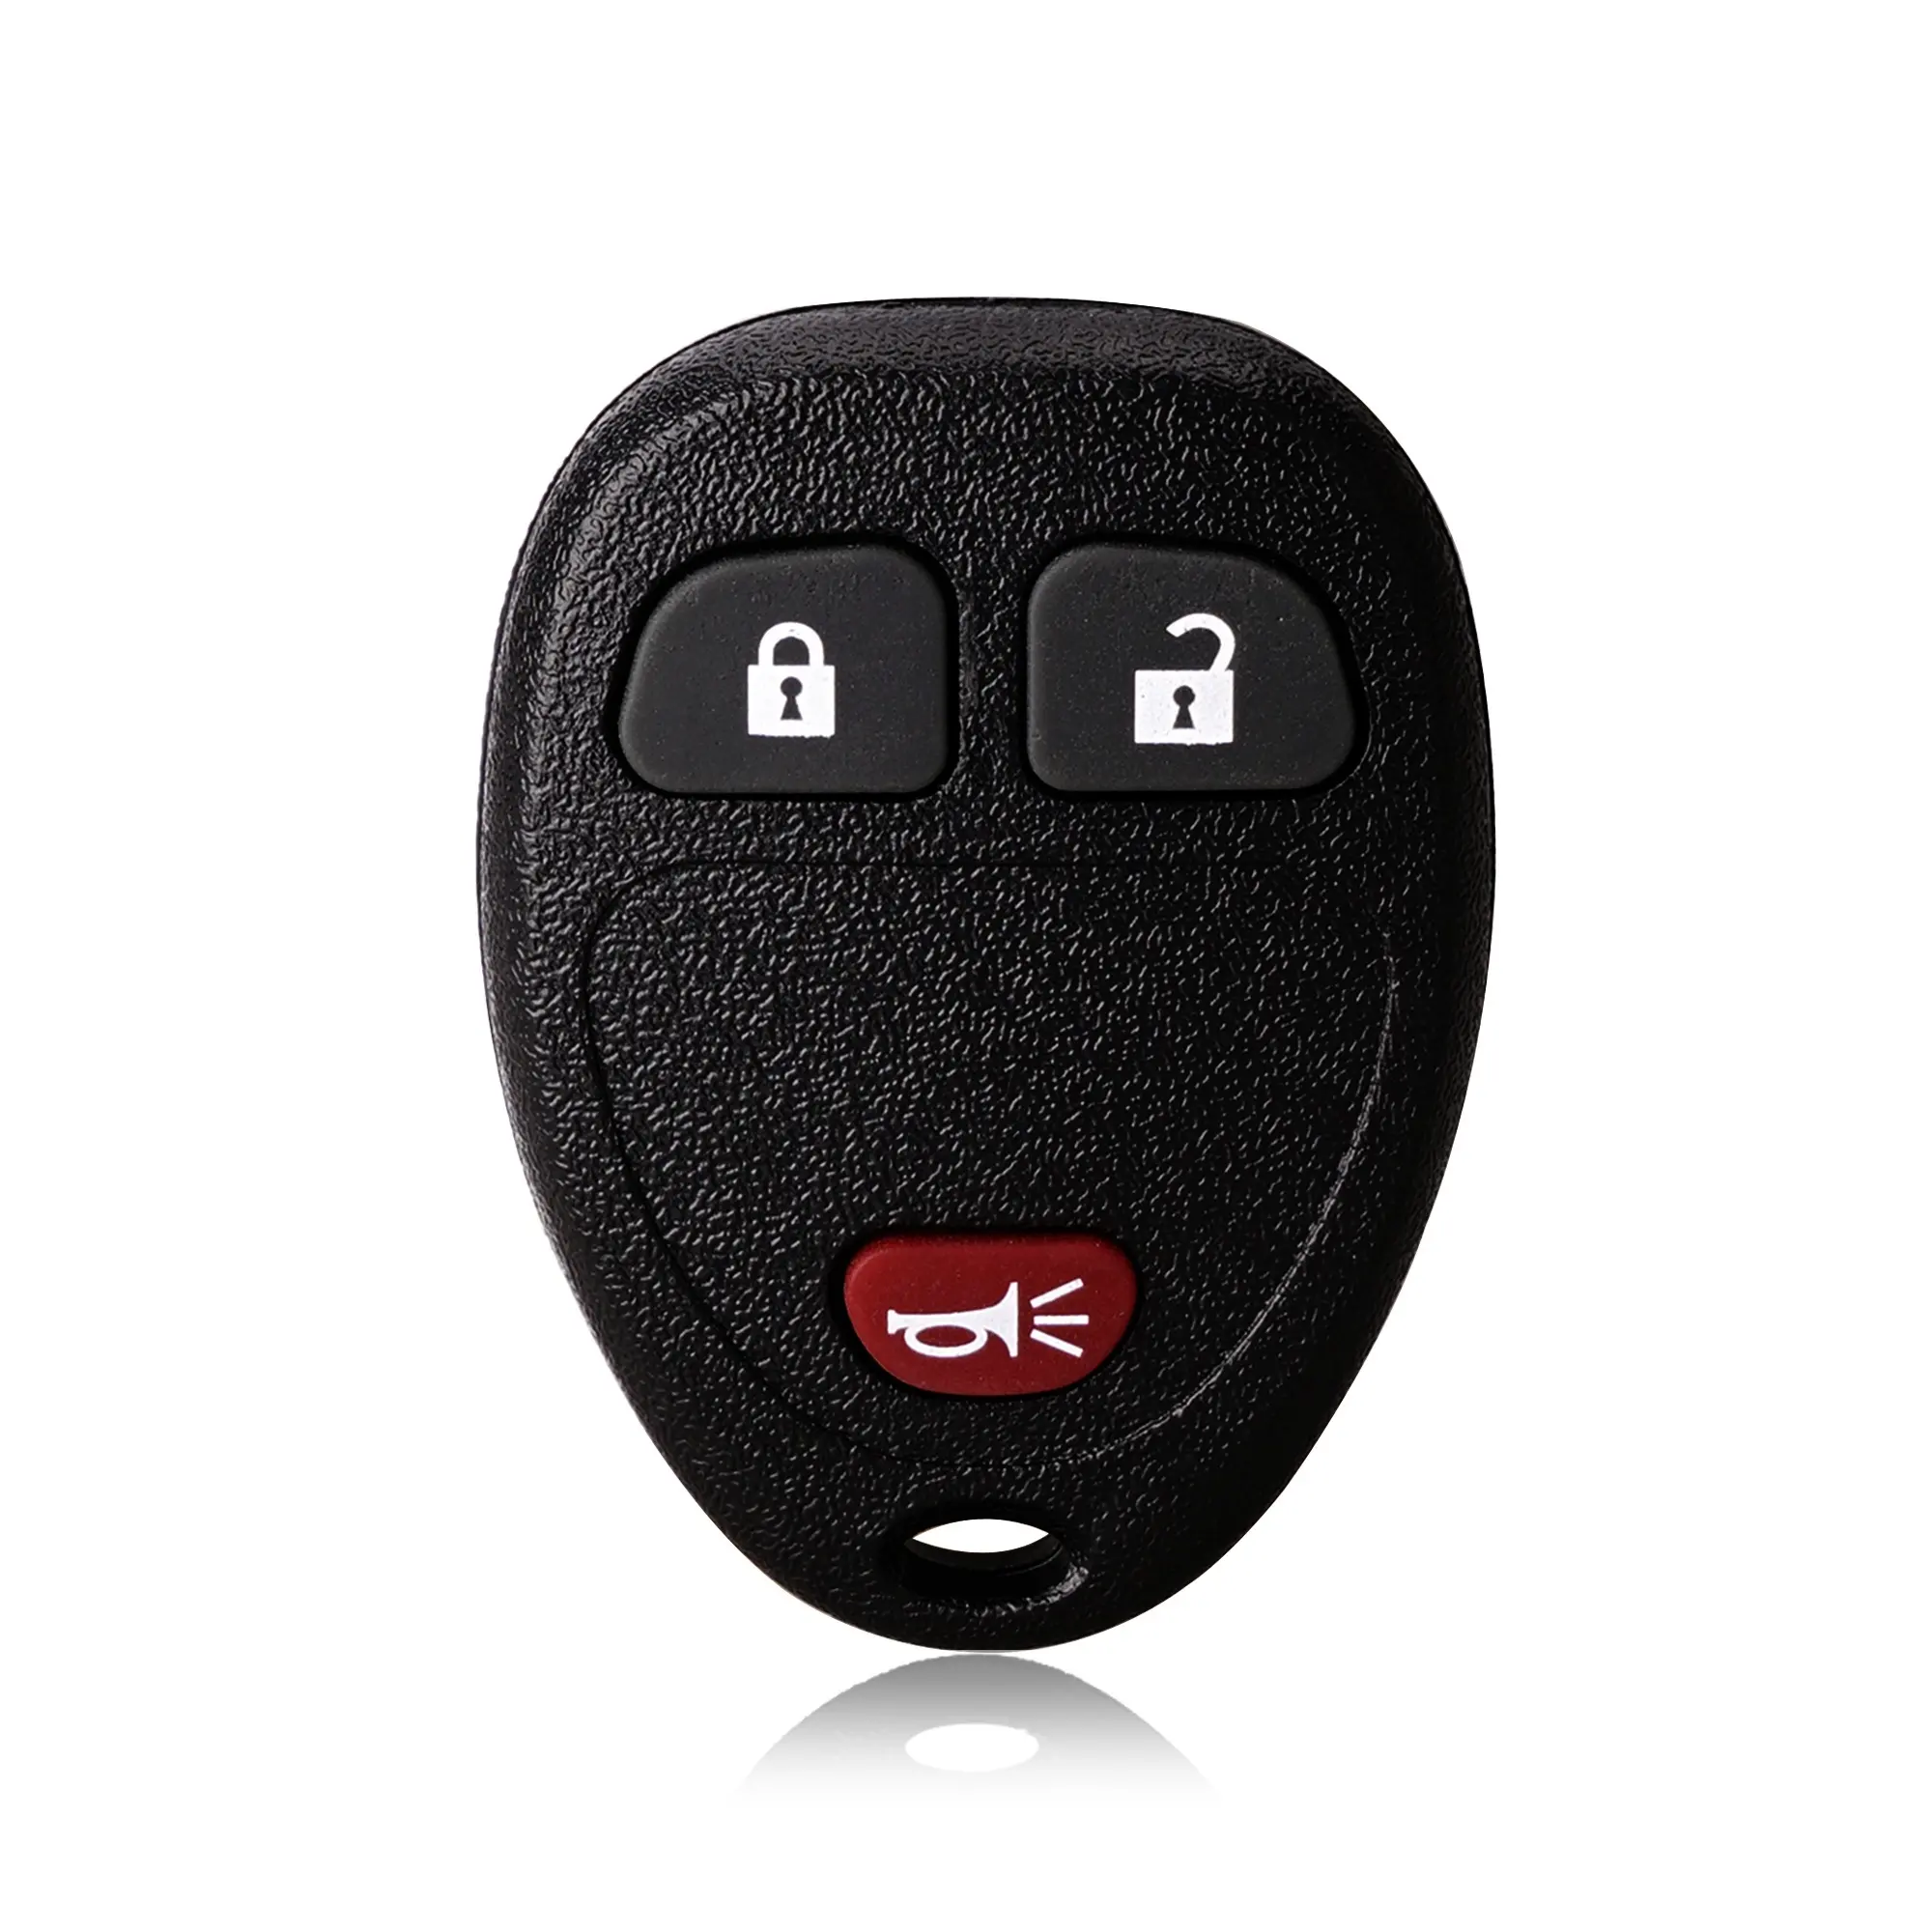 3 Buttons 315MHz Keyless Entry Fob Car Remote Key For 2007-2017 Chevrolet Silverado GMC Cadillac Buick Enclave FCC ID: OUC60270